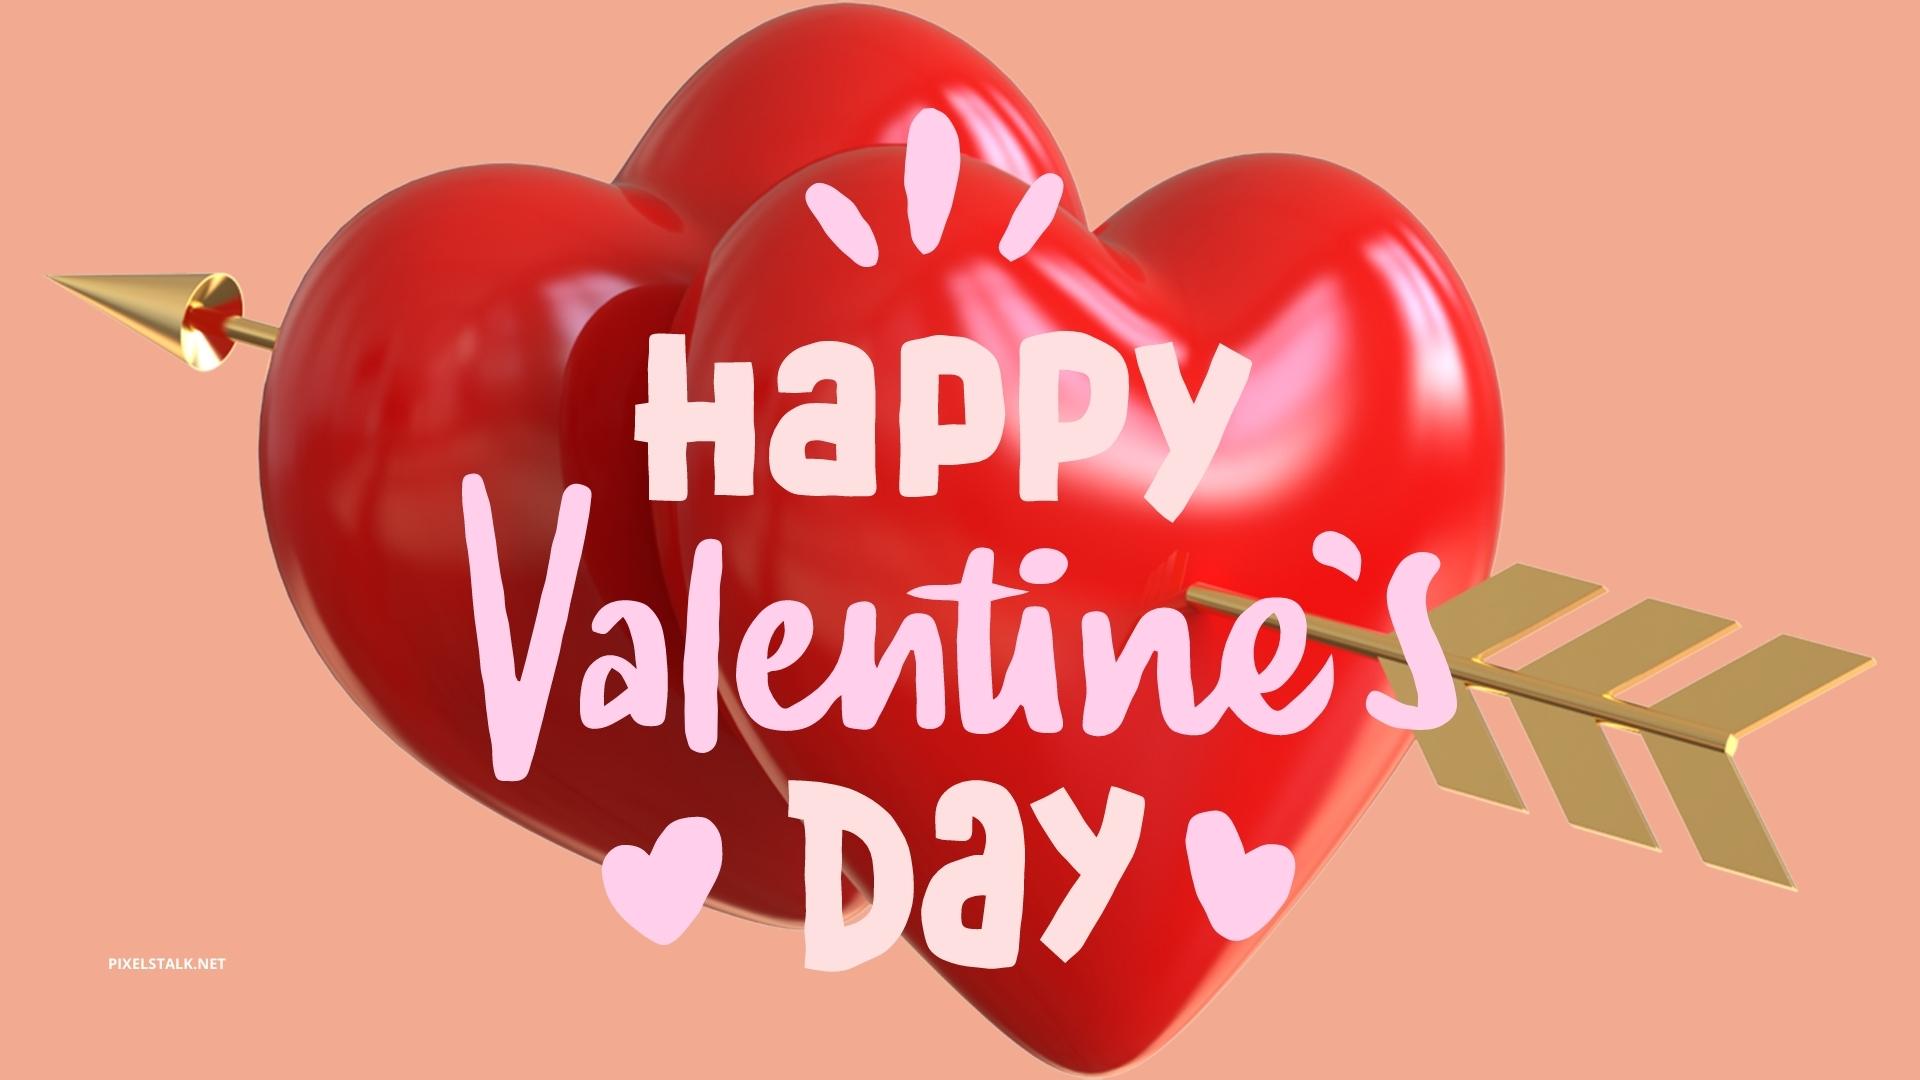 Hd wallpapers valentines download